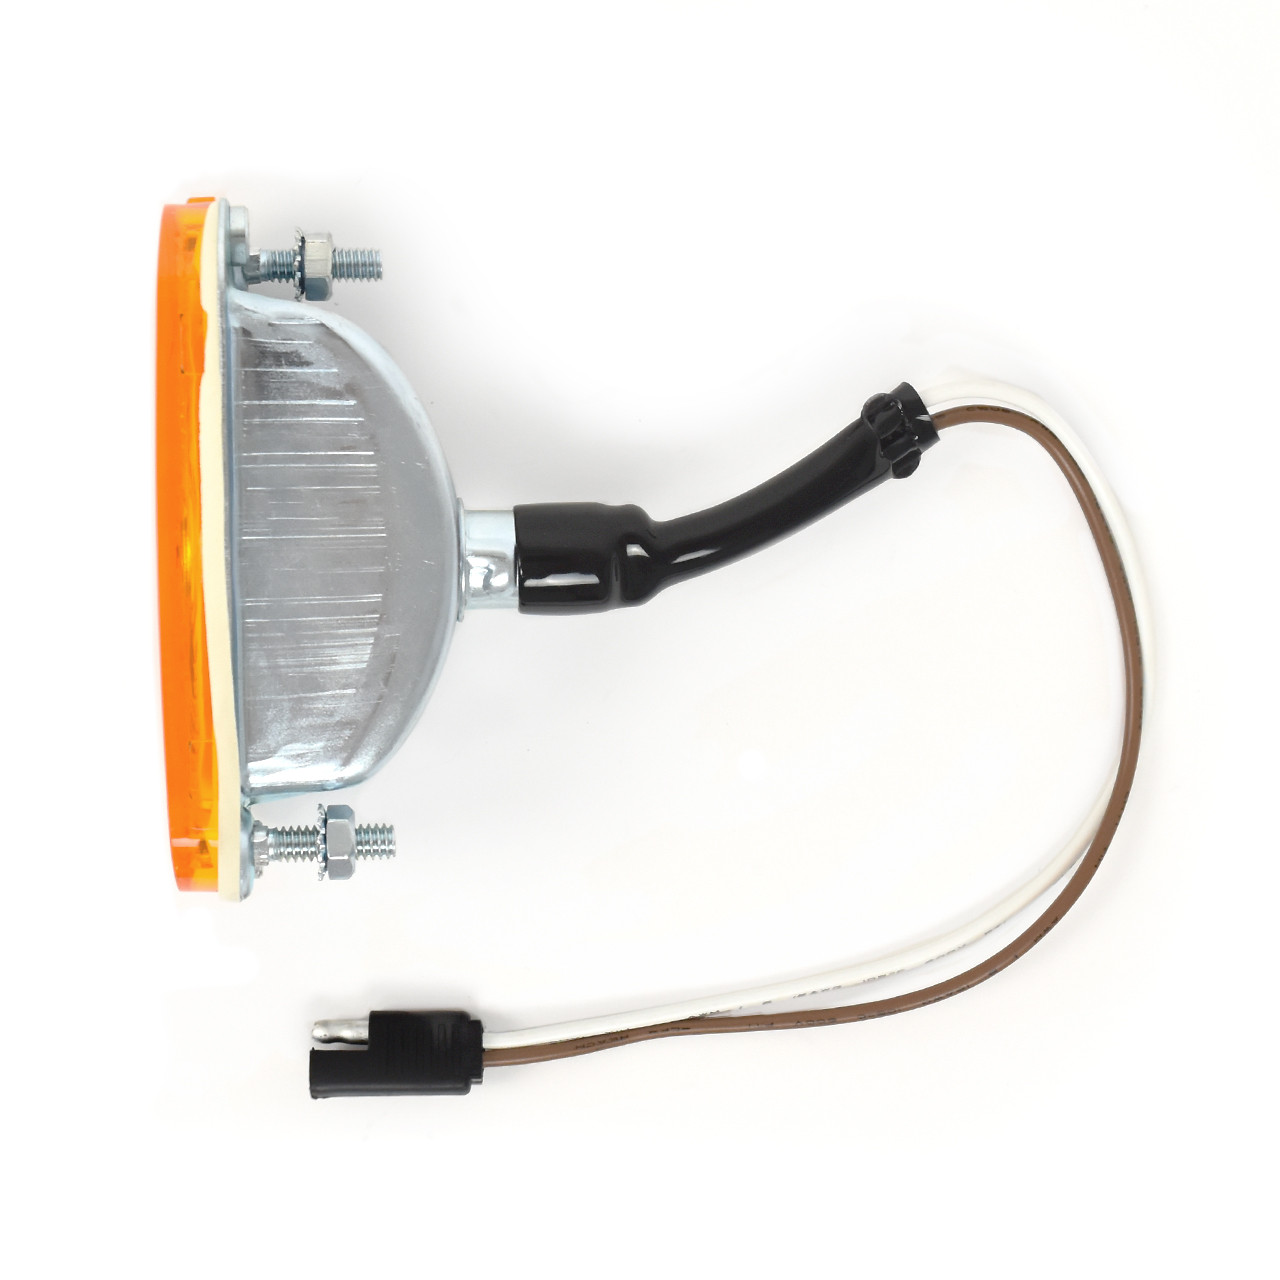 Turn Signal Parking Light Assembly With Amber Lens Fits LH or RH [FB-BP001]